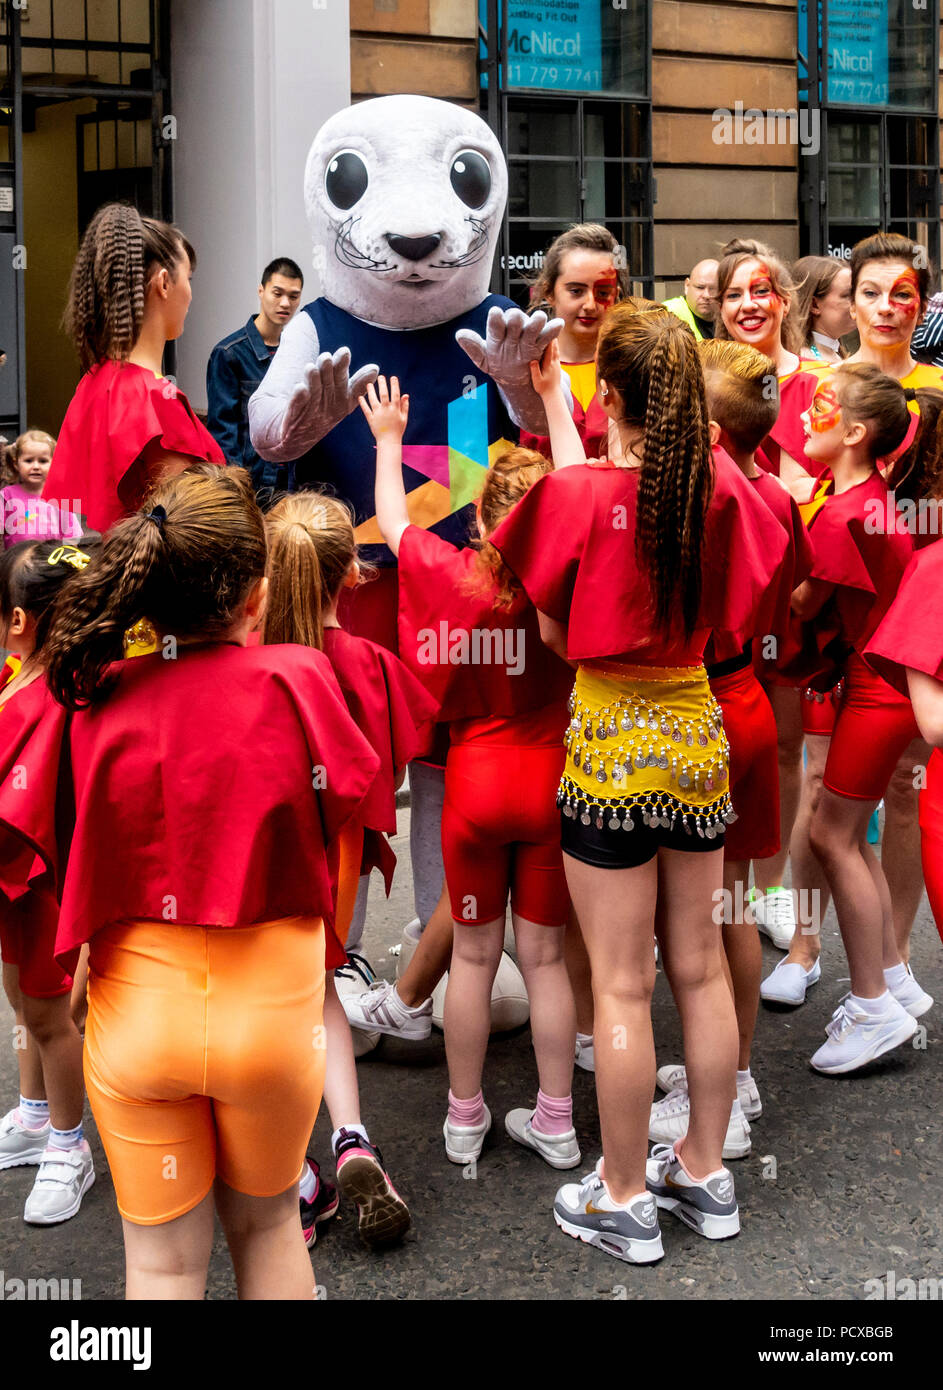 Glasgow, Scotland, UK. 04th August 2018. Bonnie the Seal, Mascot of the European Championships, Glasgow 2018, meeting and greeting children about to take part in the Merchant City Festival Parade. The parade was part of Festival 2018, which is running in the city in parallel with the sports event. Credit: Elizabeth Leyden/Alamy Live News Stock Photo